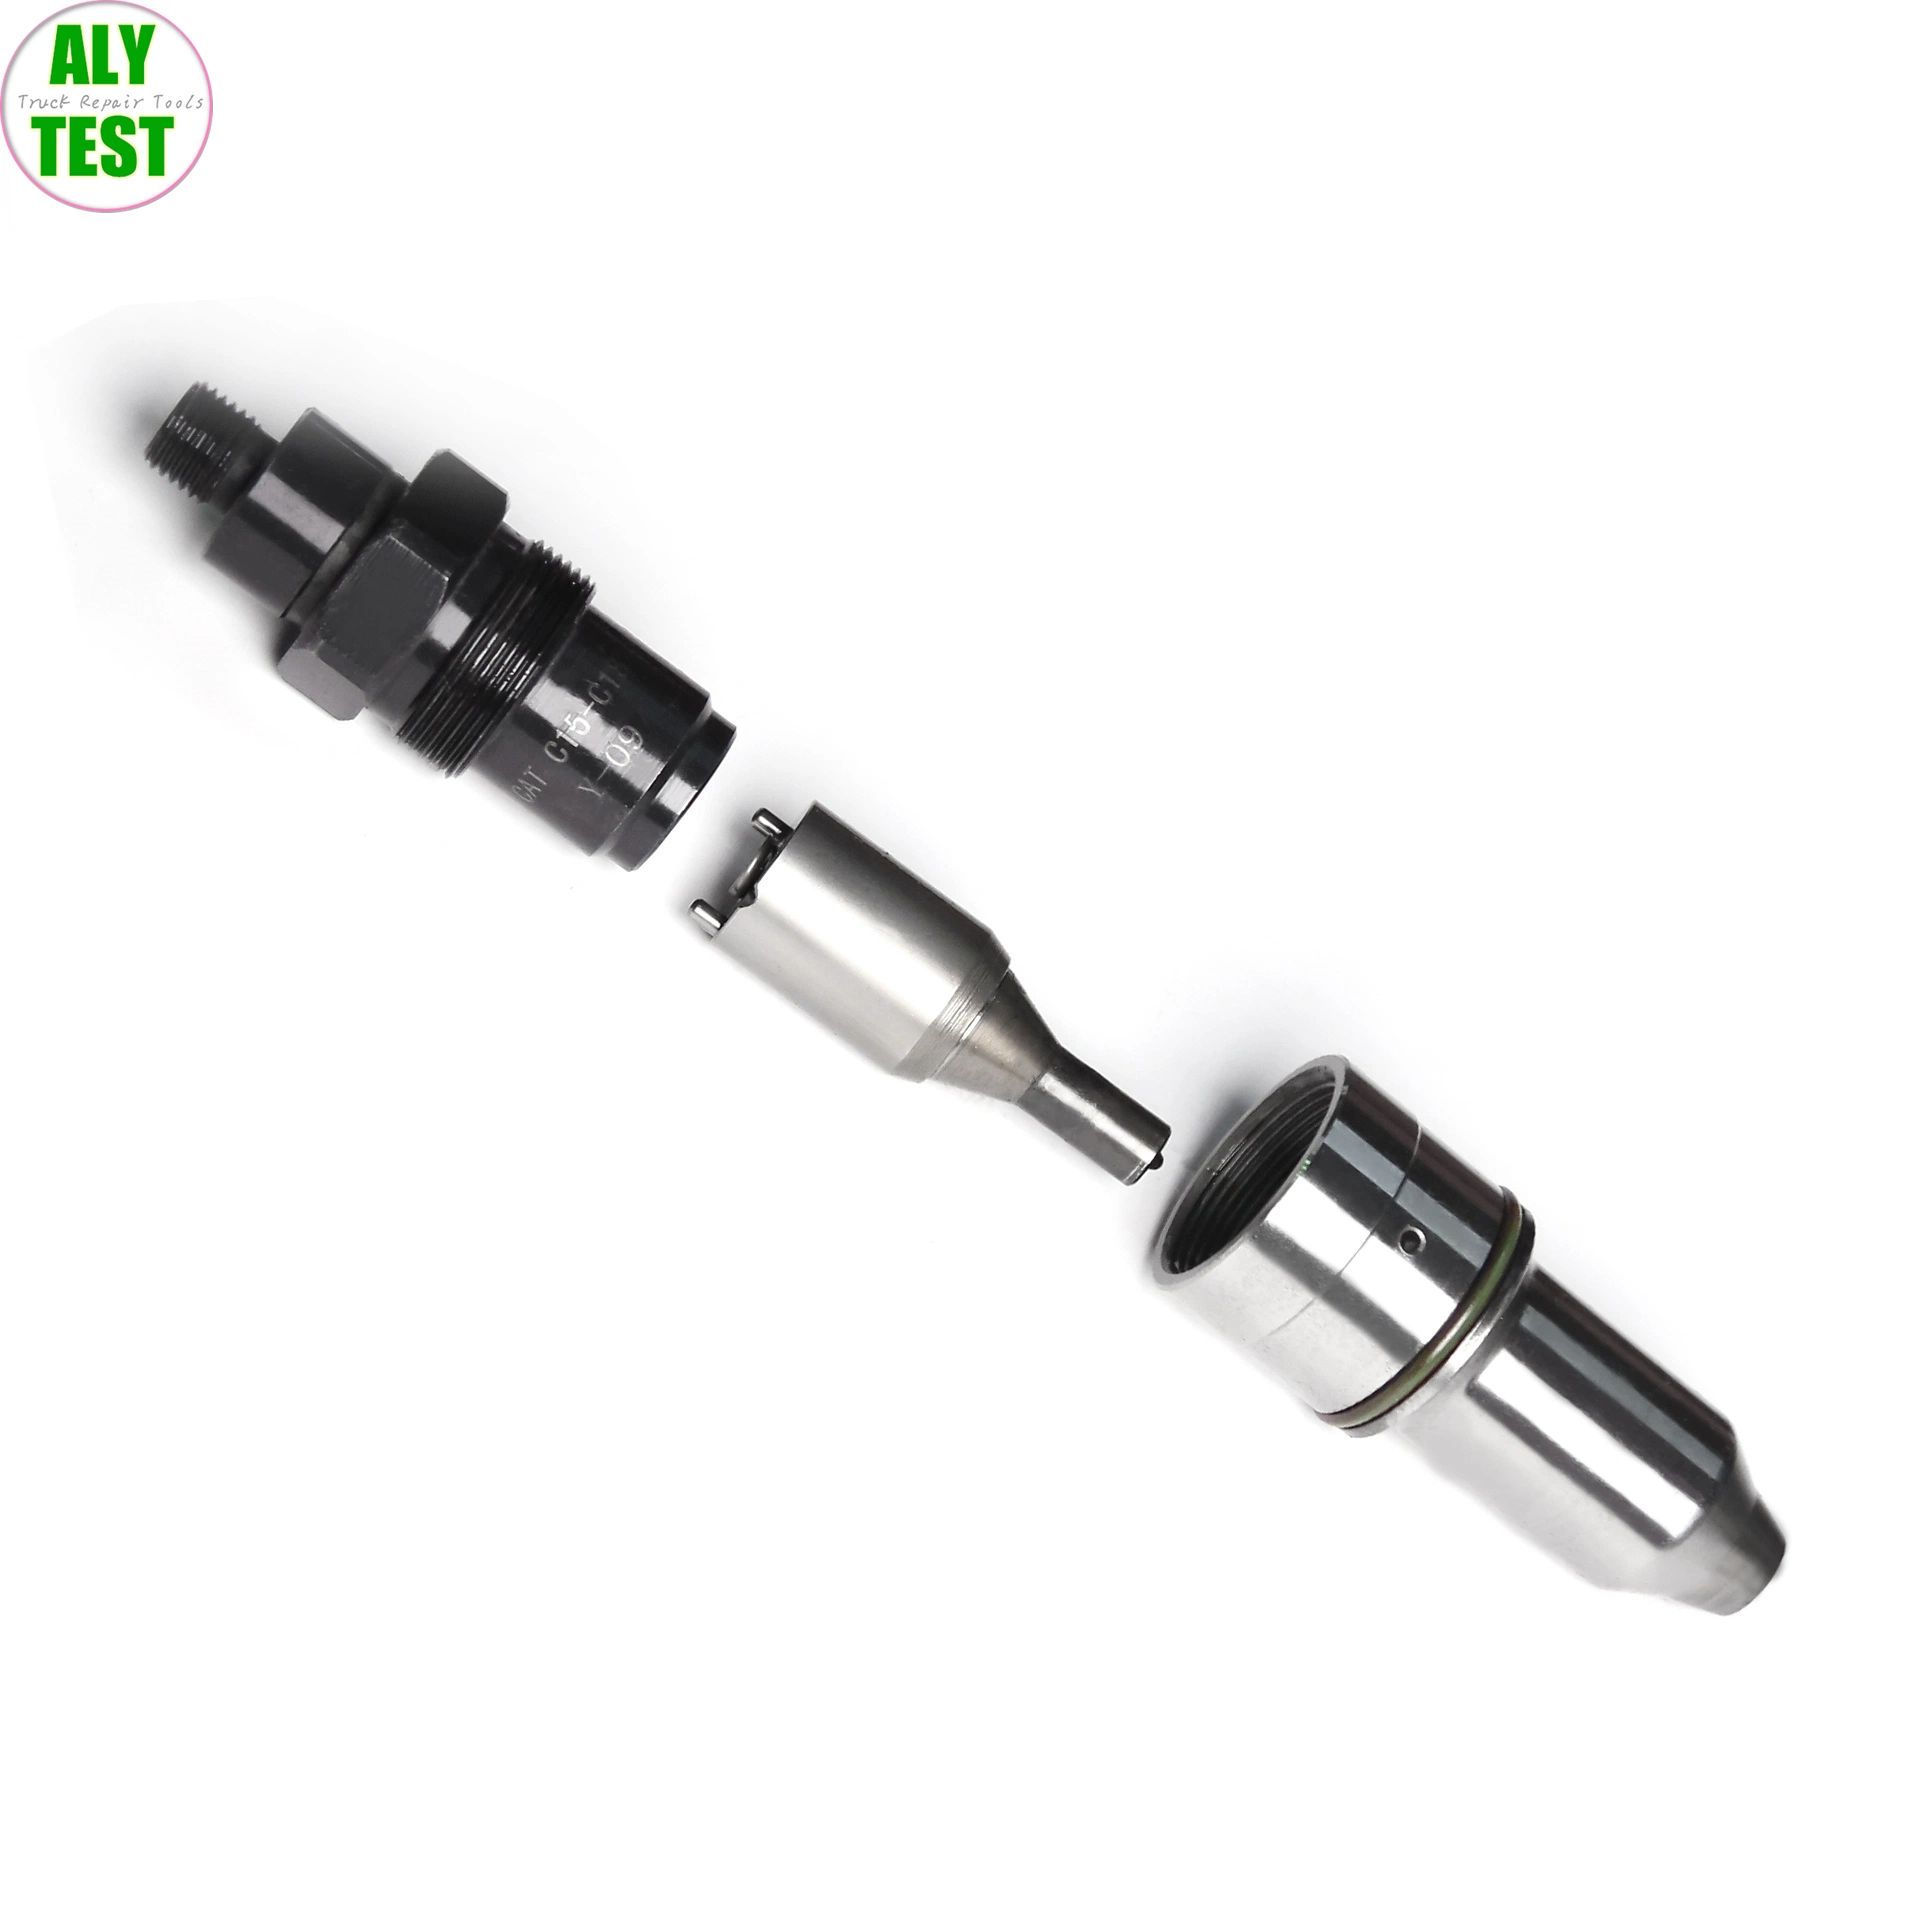 Factory Direct Selling Full Removing Tools Set for Injector Disassembly Tool